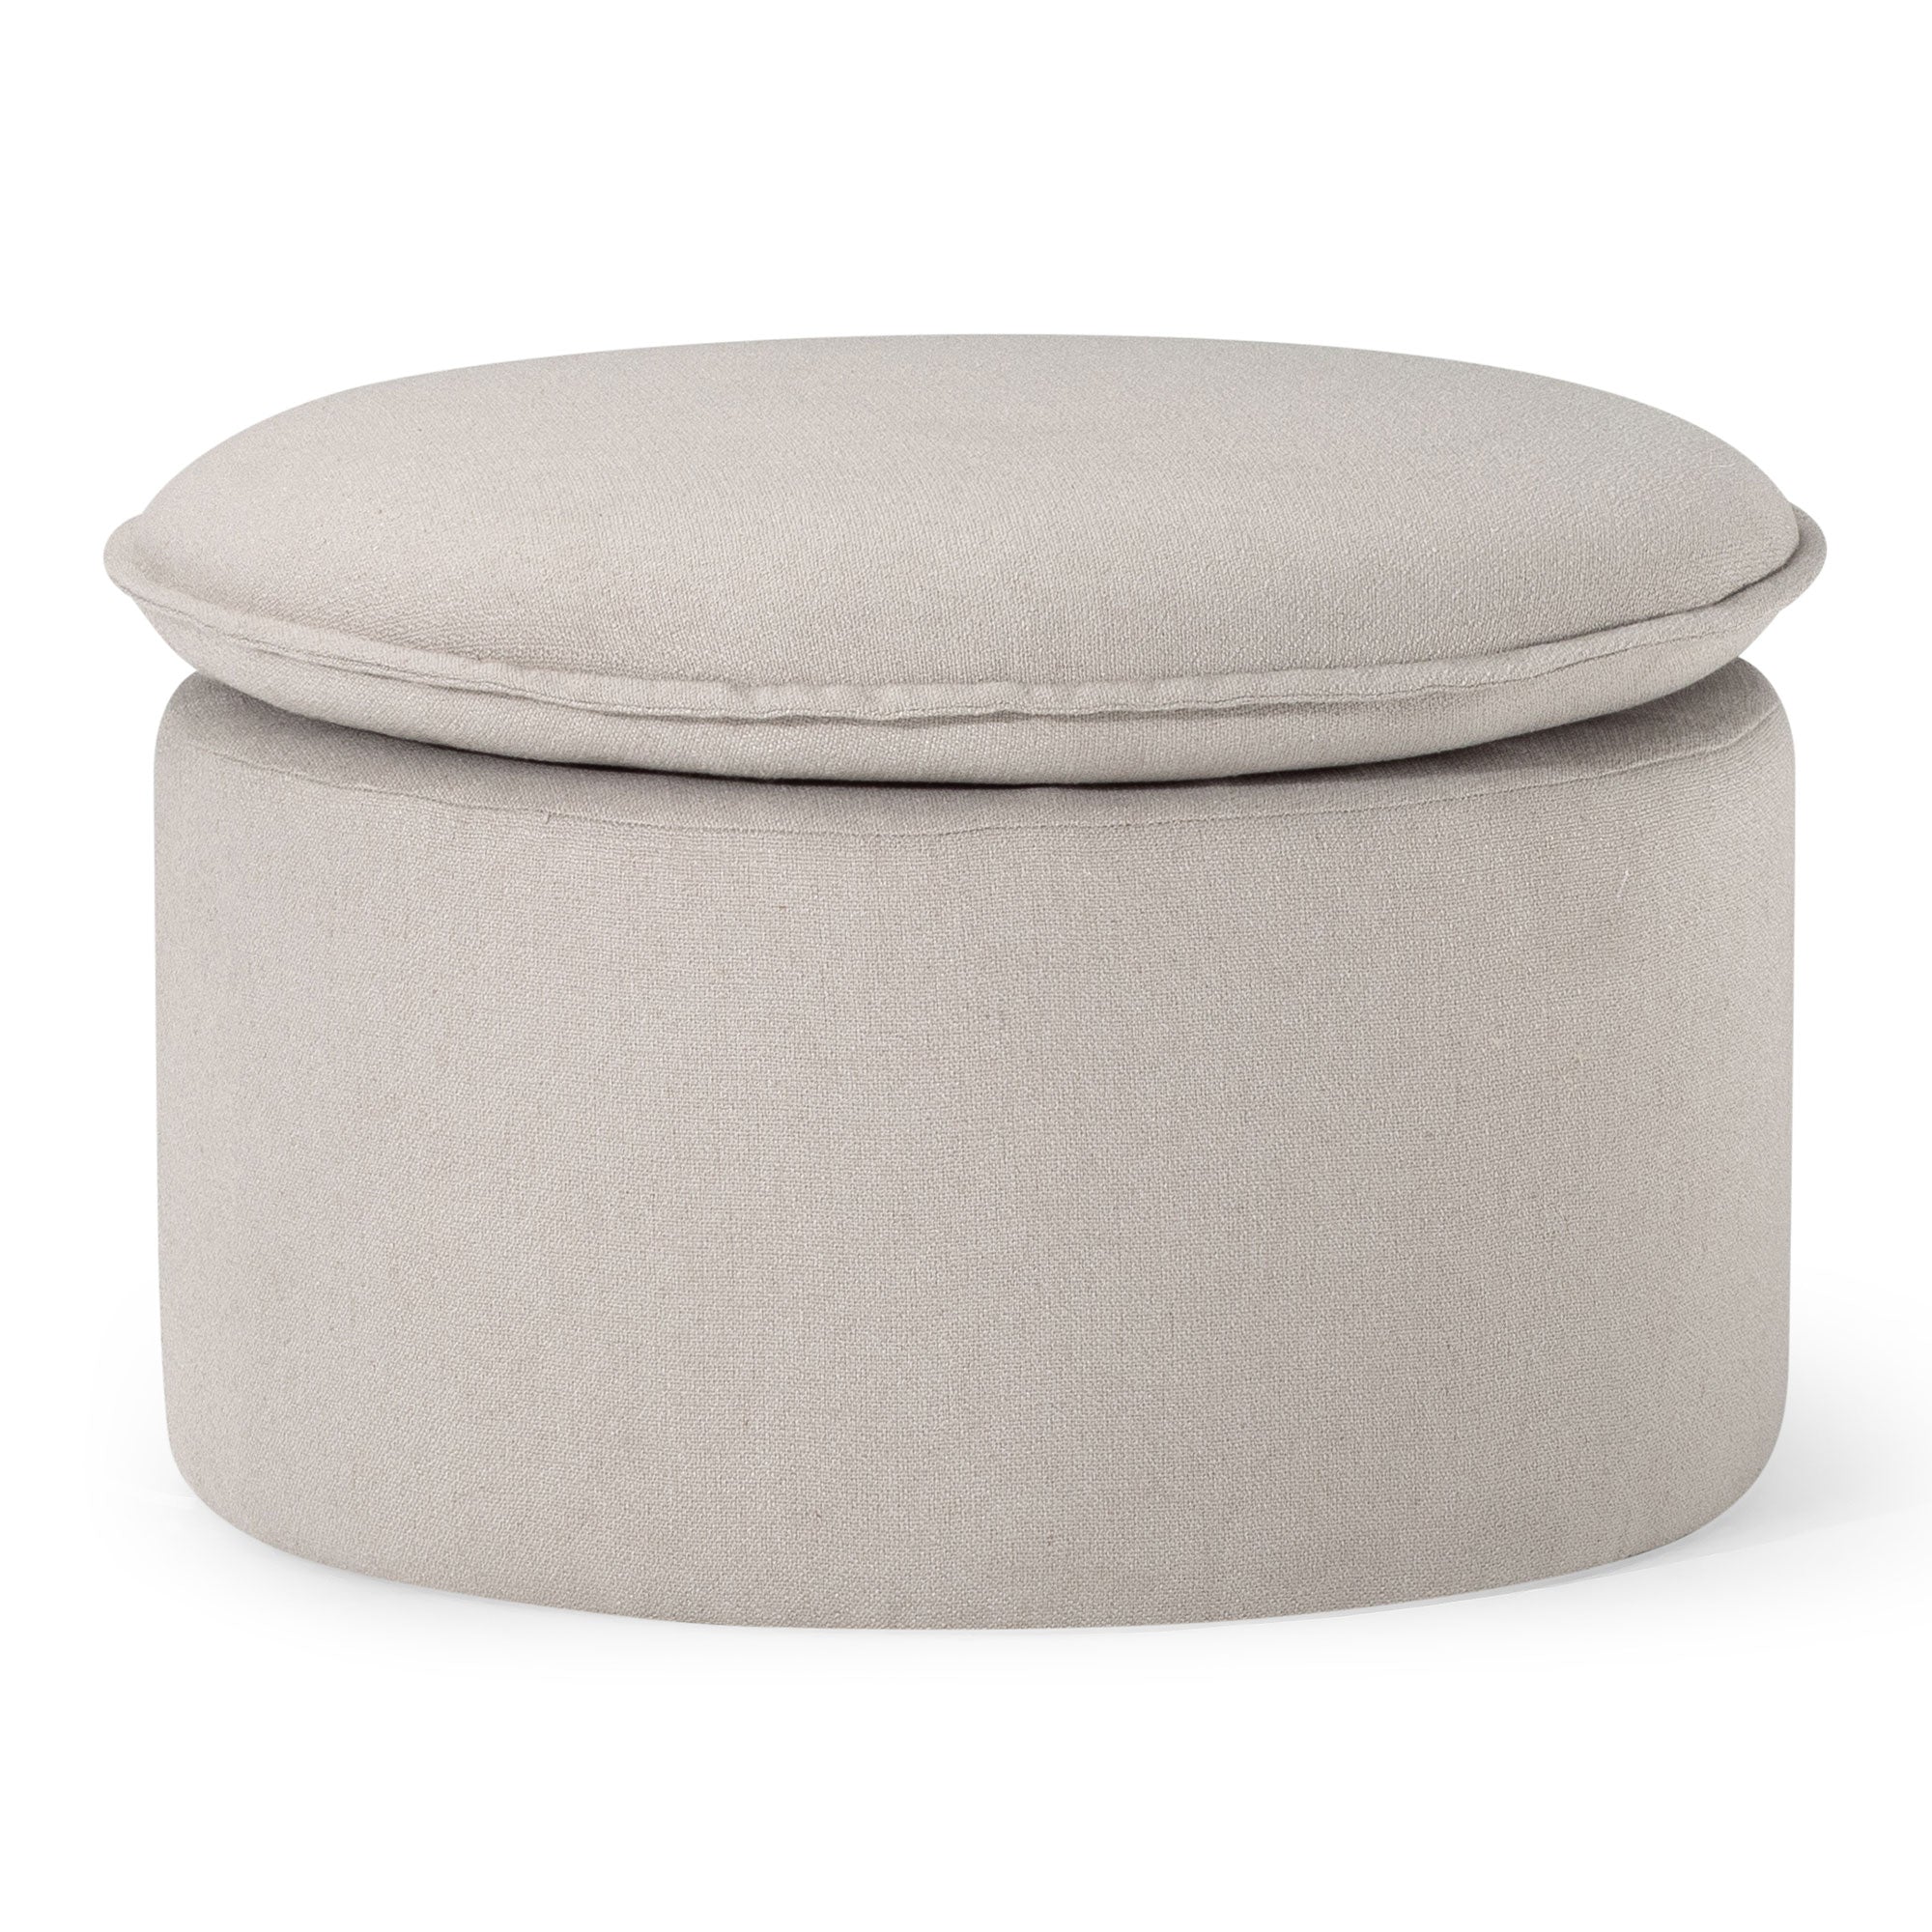 Lyra Organic Ottoman in Dove Fabric Upholstery in Ottomans & Benches by Maven Lane